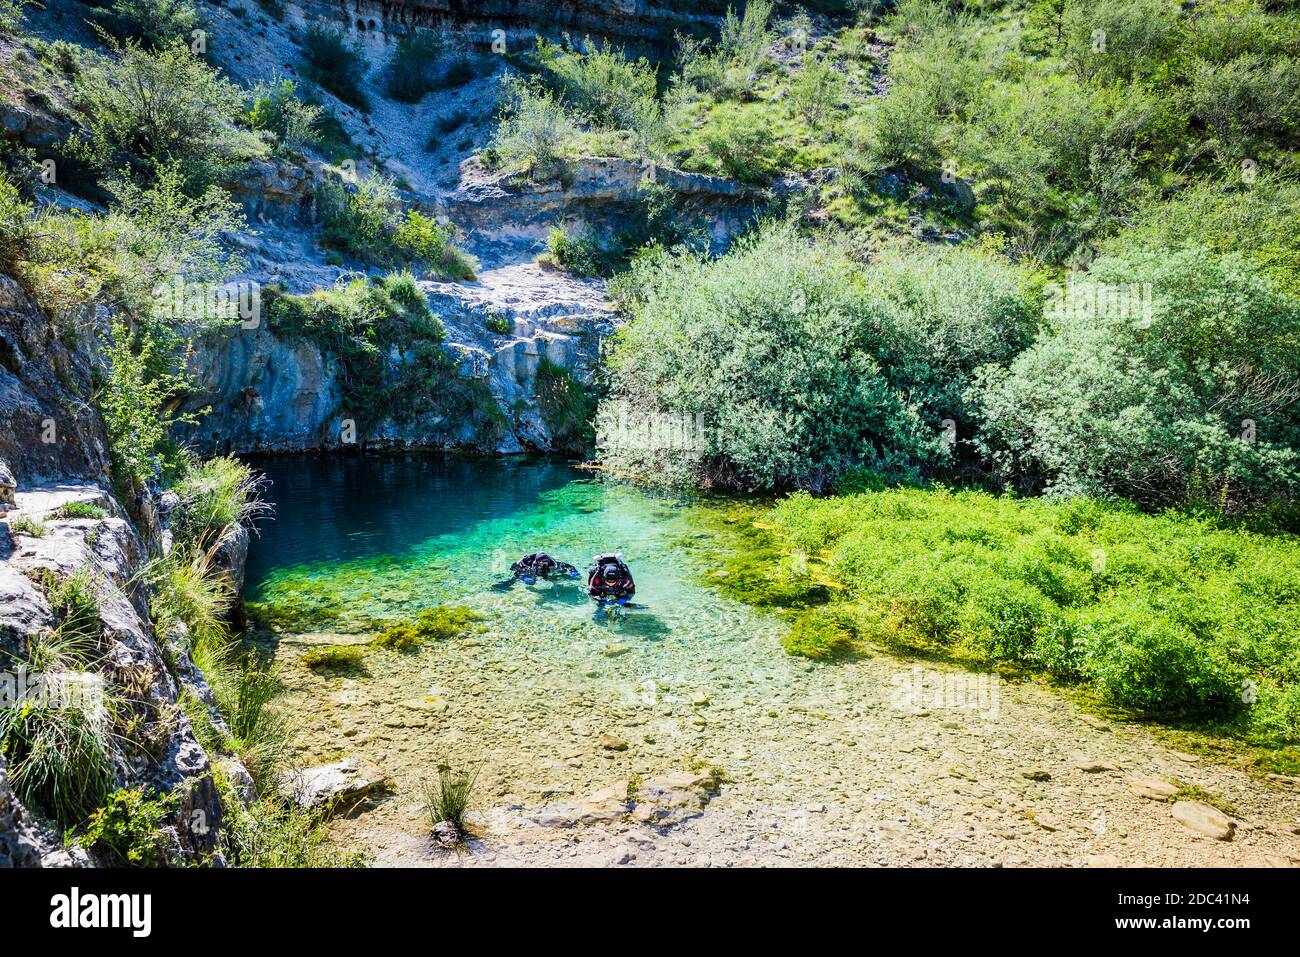 Divers in Pozo Azul. Underwater Speleology. Pozo Azul is a spring or upwelling of water located in the Burgos town of Covanera. Covanera, Tubilla del Stock Photo